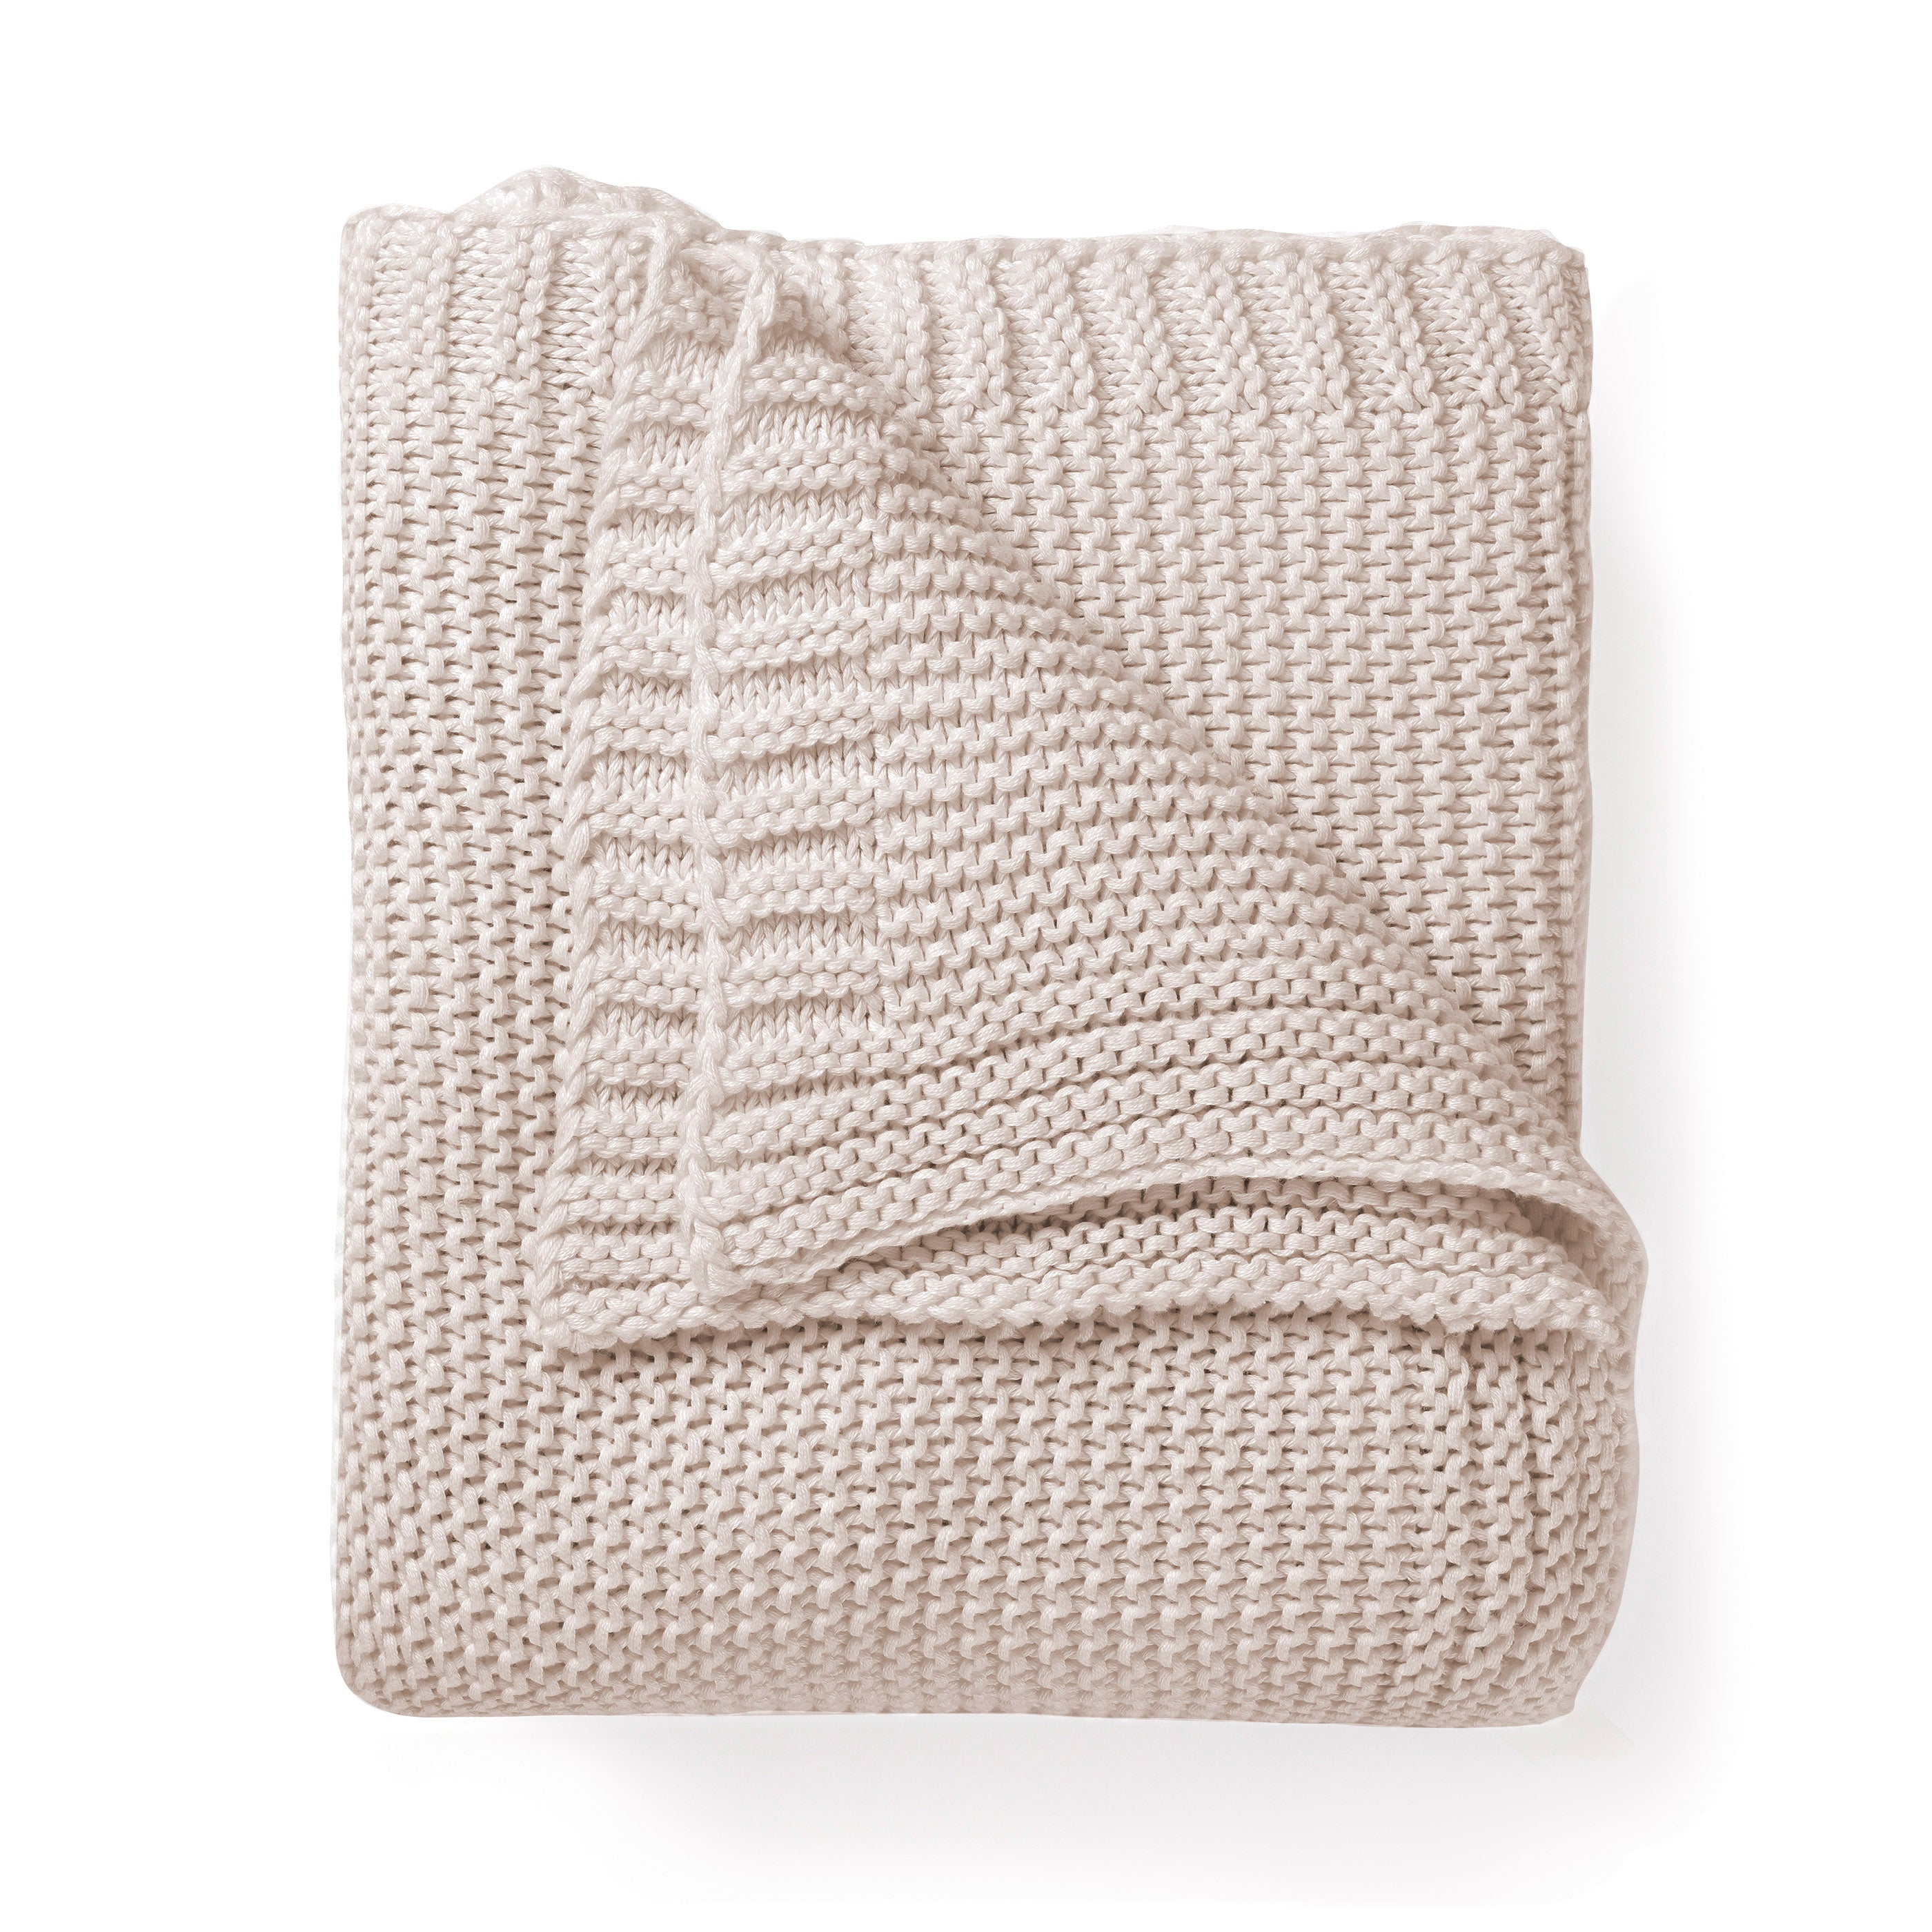 Chunky Knit Throw Blanket - Nora Shell by Makemake Organics neatly folded over itself, isolated on a white background, showcasing its textured weave and cozy appearance.